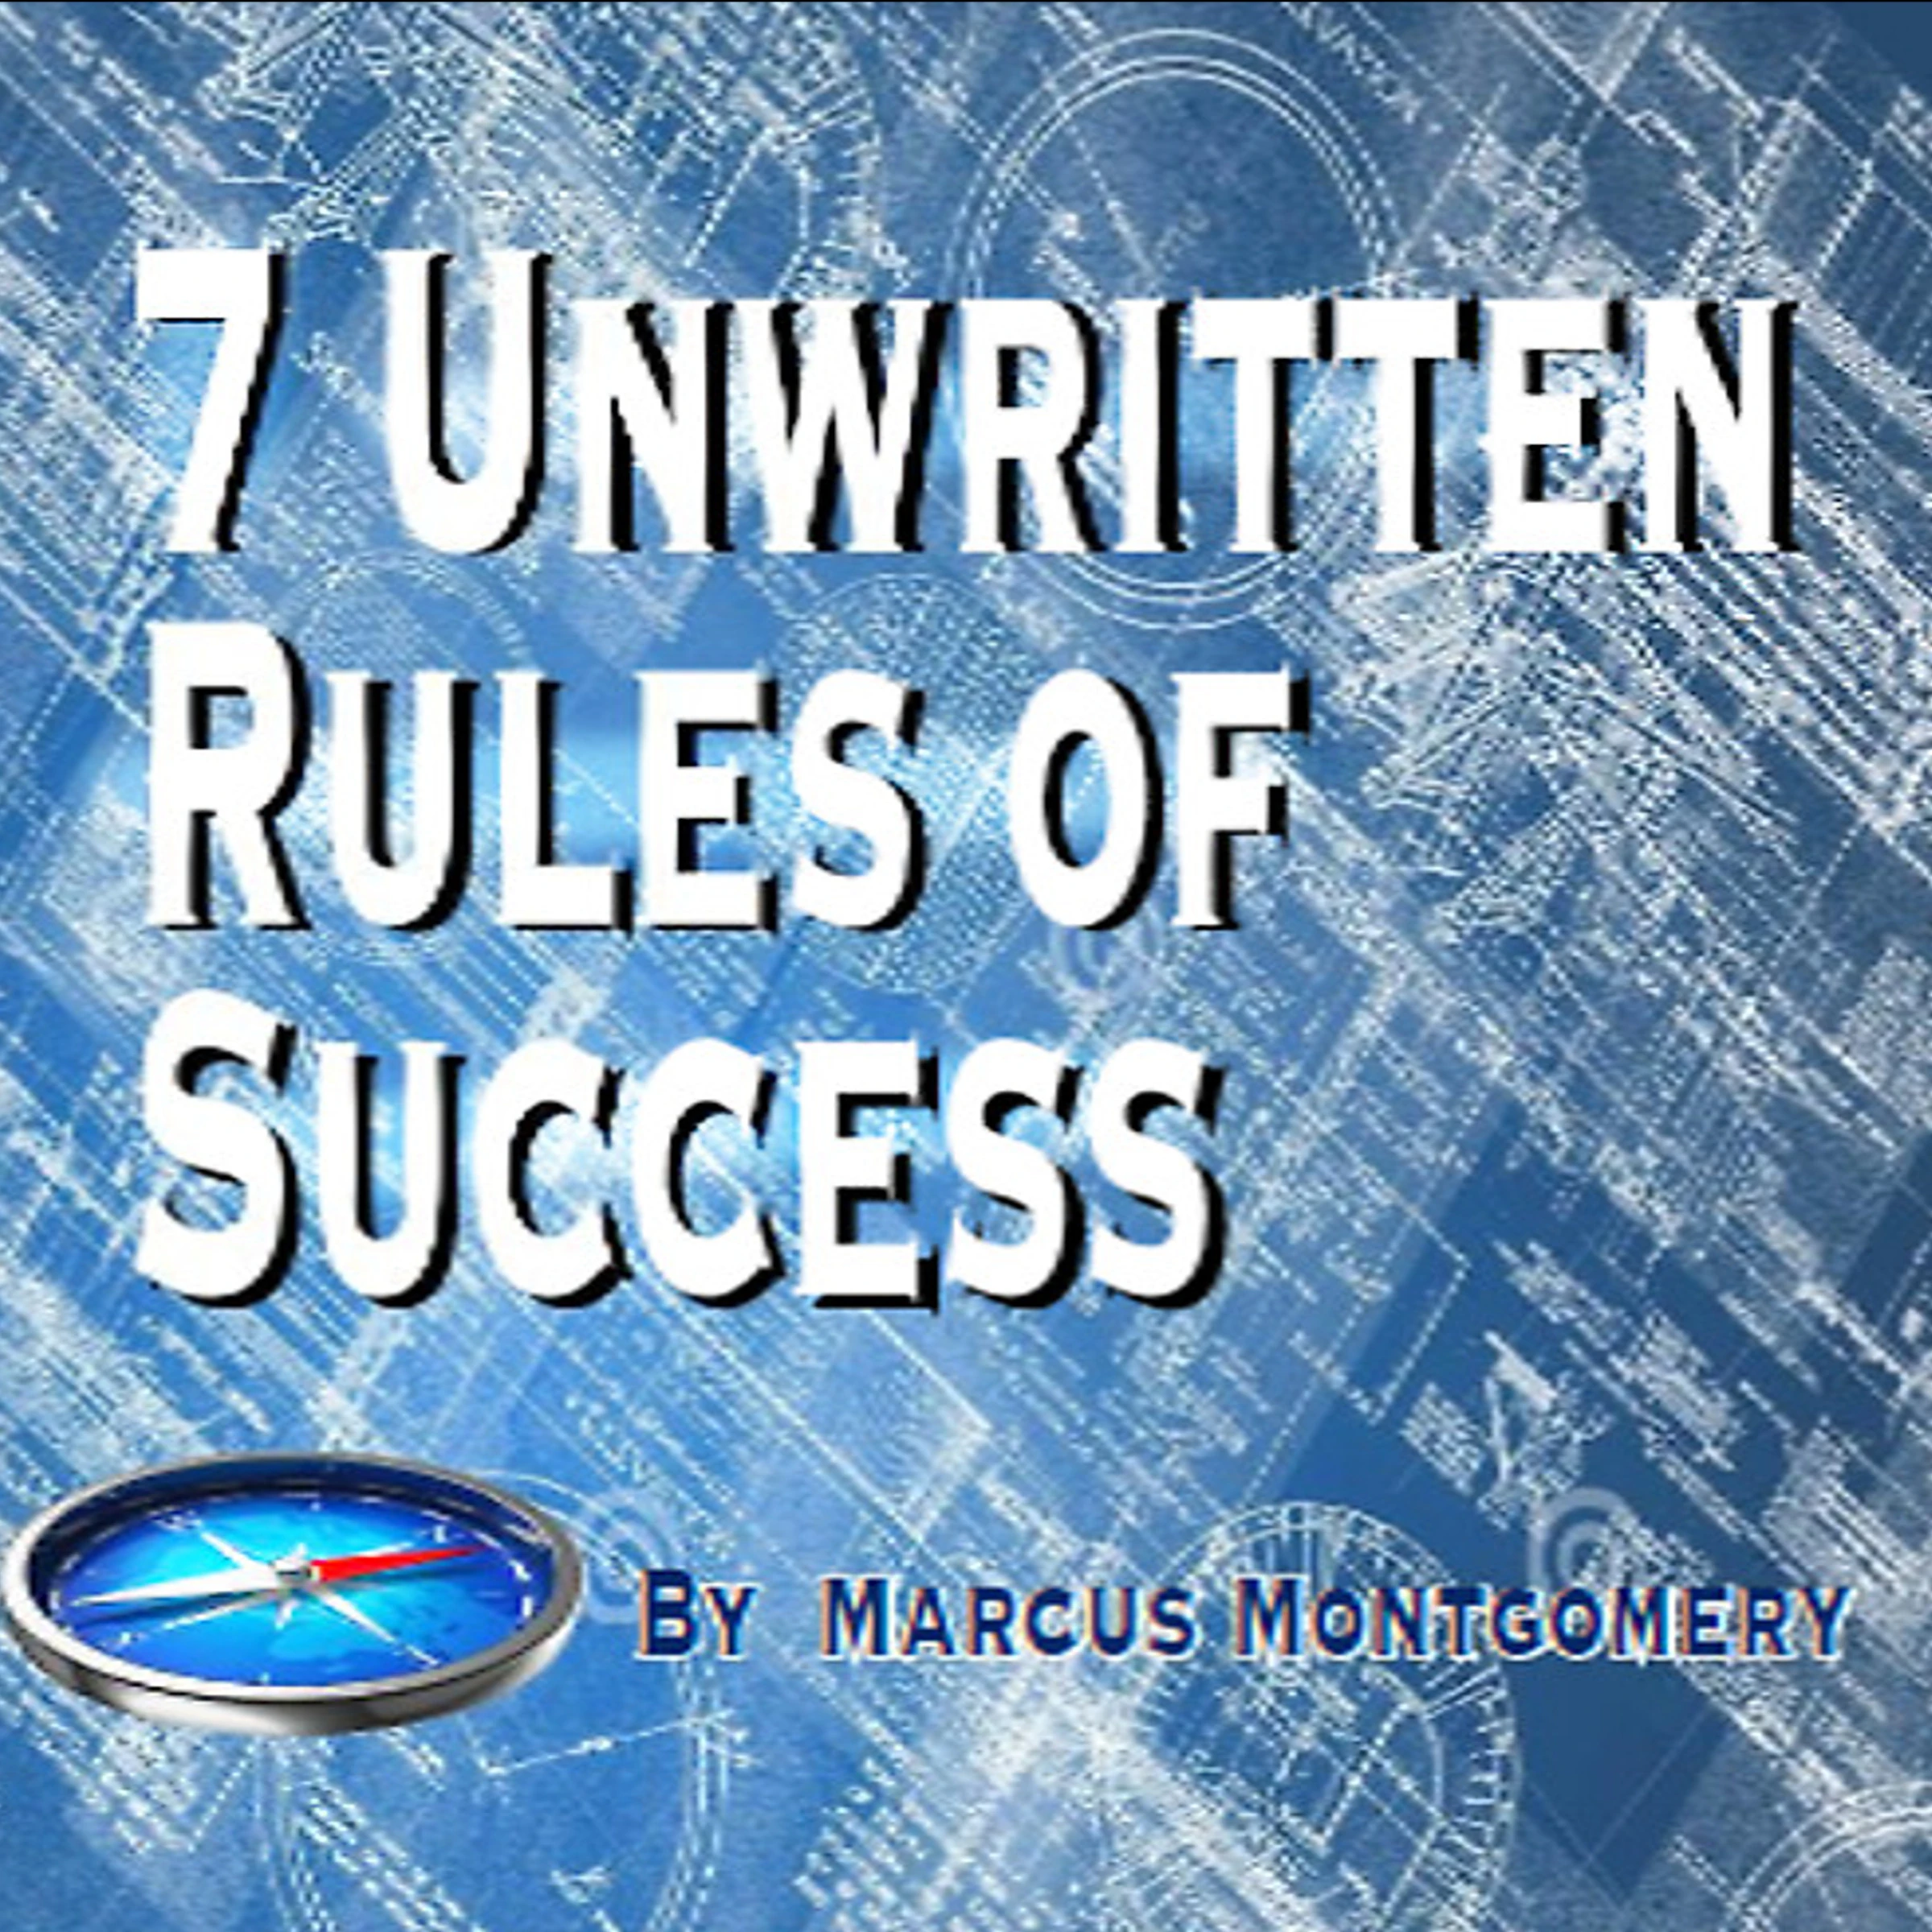 7 Un-Written Rules of Success Audiobook by Marcus Montgomery